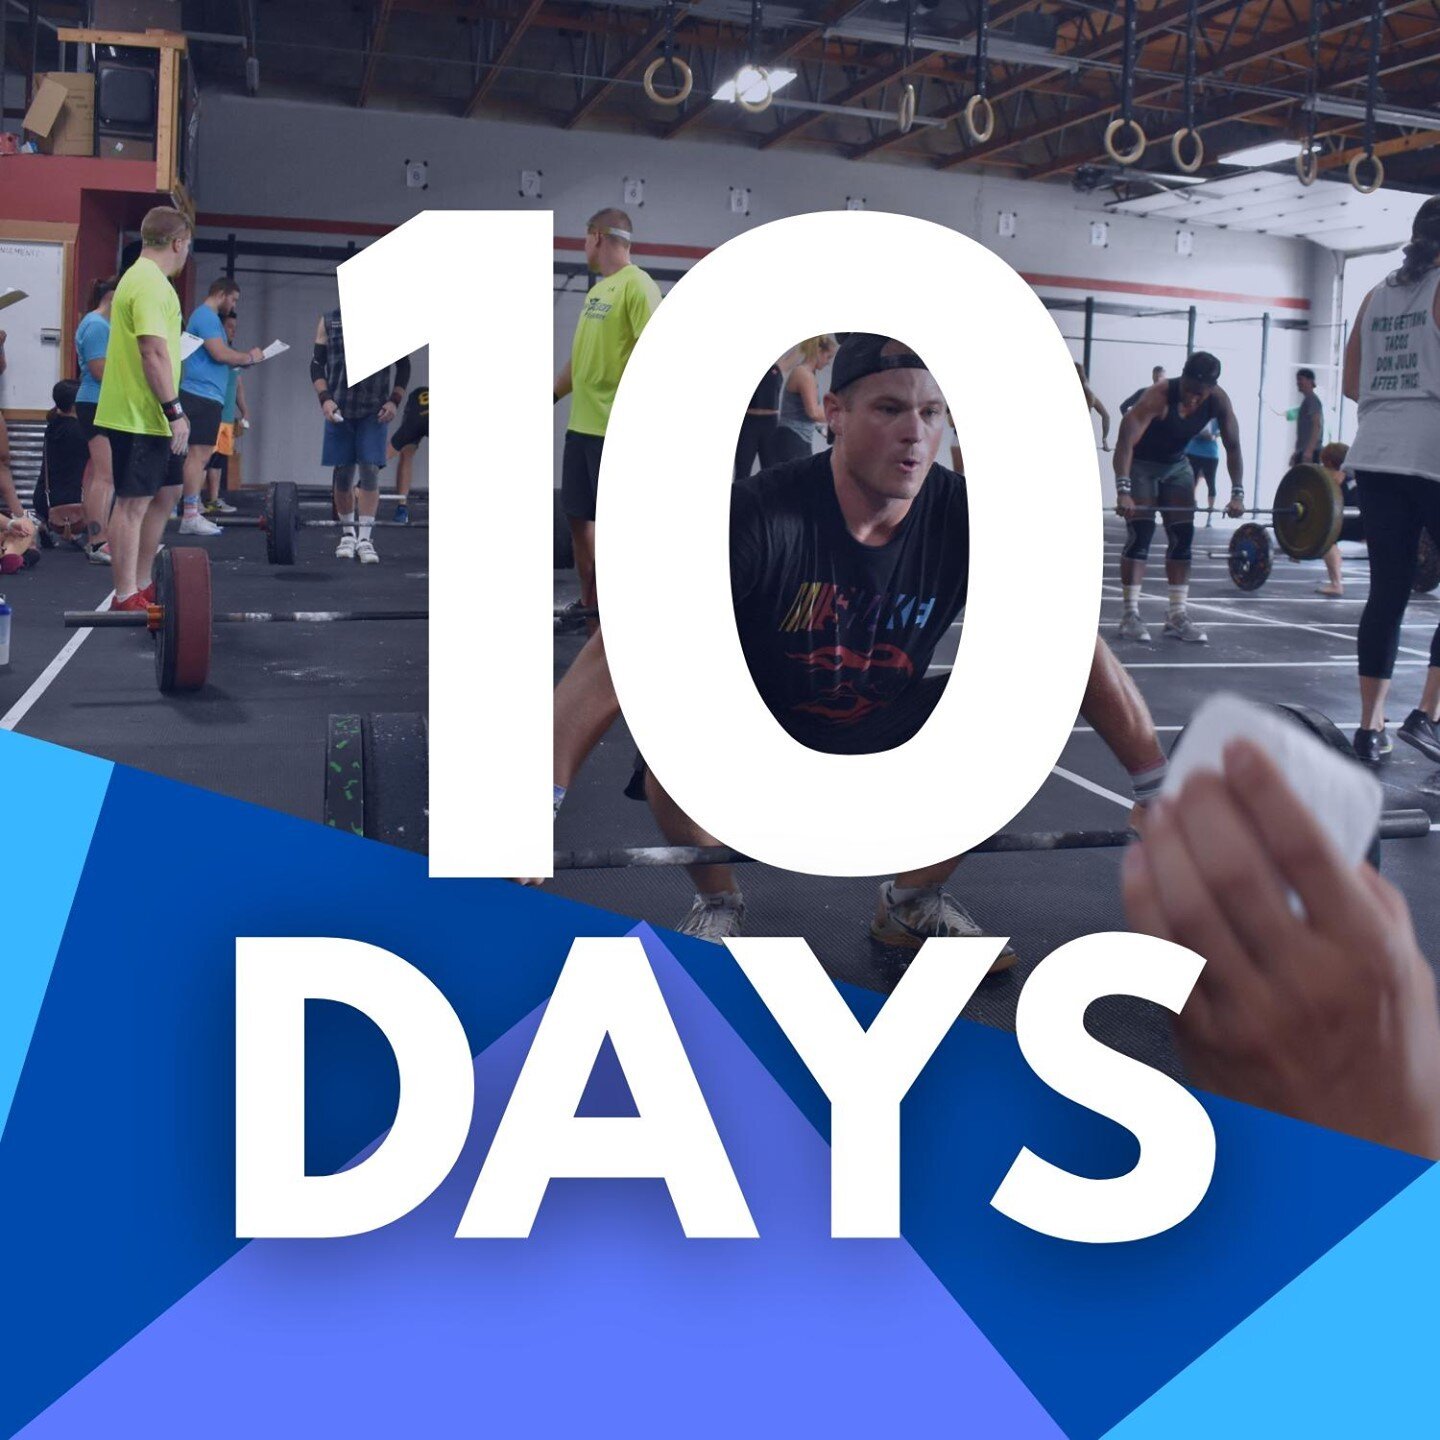 10 days 'til GO time! 🔥⁠
⁠
This is your LAST chance to sign your team up for the 2020 Doubles Competition. Registration will close at midnight Saturday! 😮👏⁠
⁠
Link in bio to sign-up ⬆️⁠
⁠
⁠
#kilotrained #crossfitkilo2 #crossfit #iowacity #fitness 